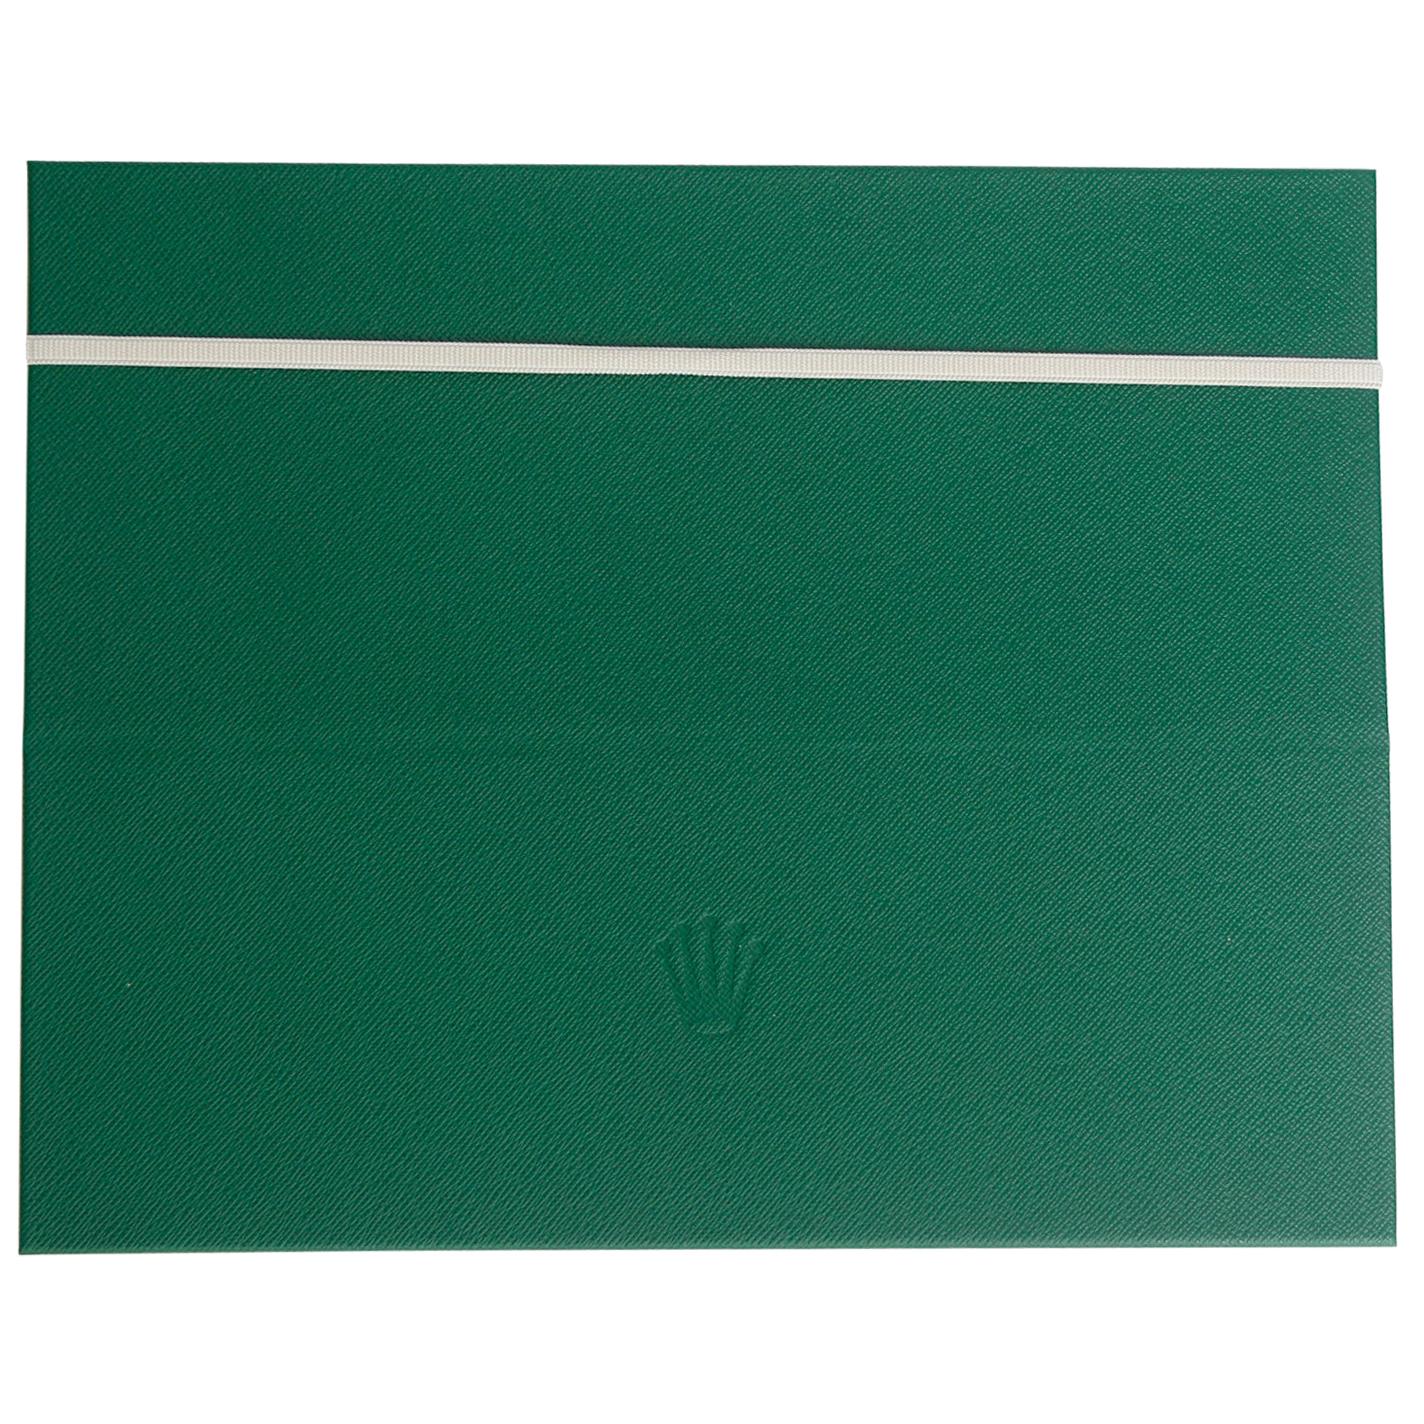 Rolex Green Tablet Case for Ipad or Samsung Tab 4